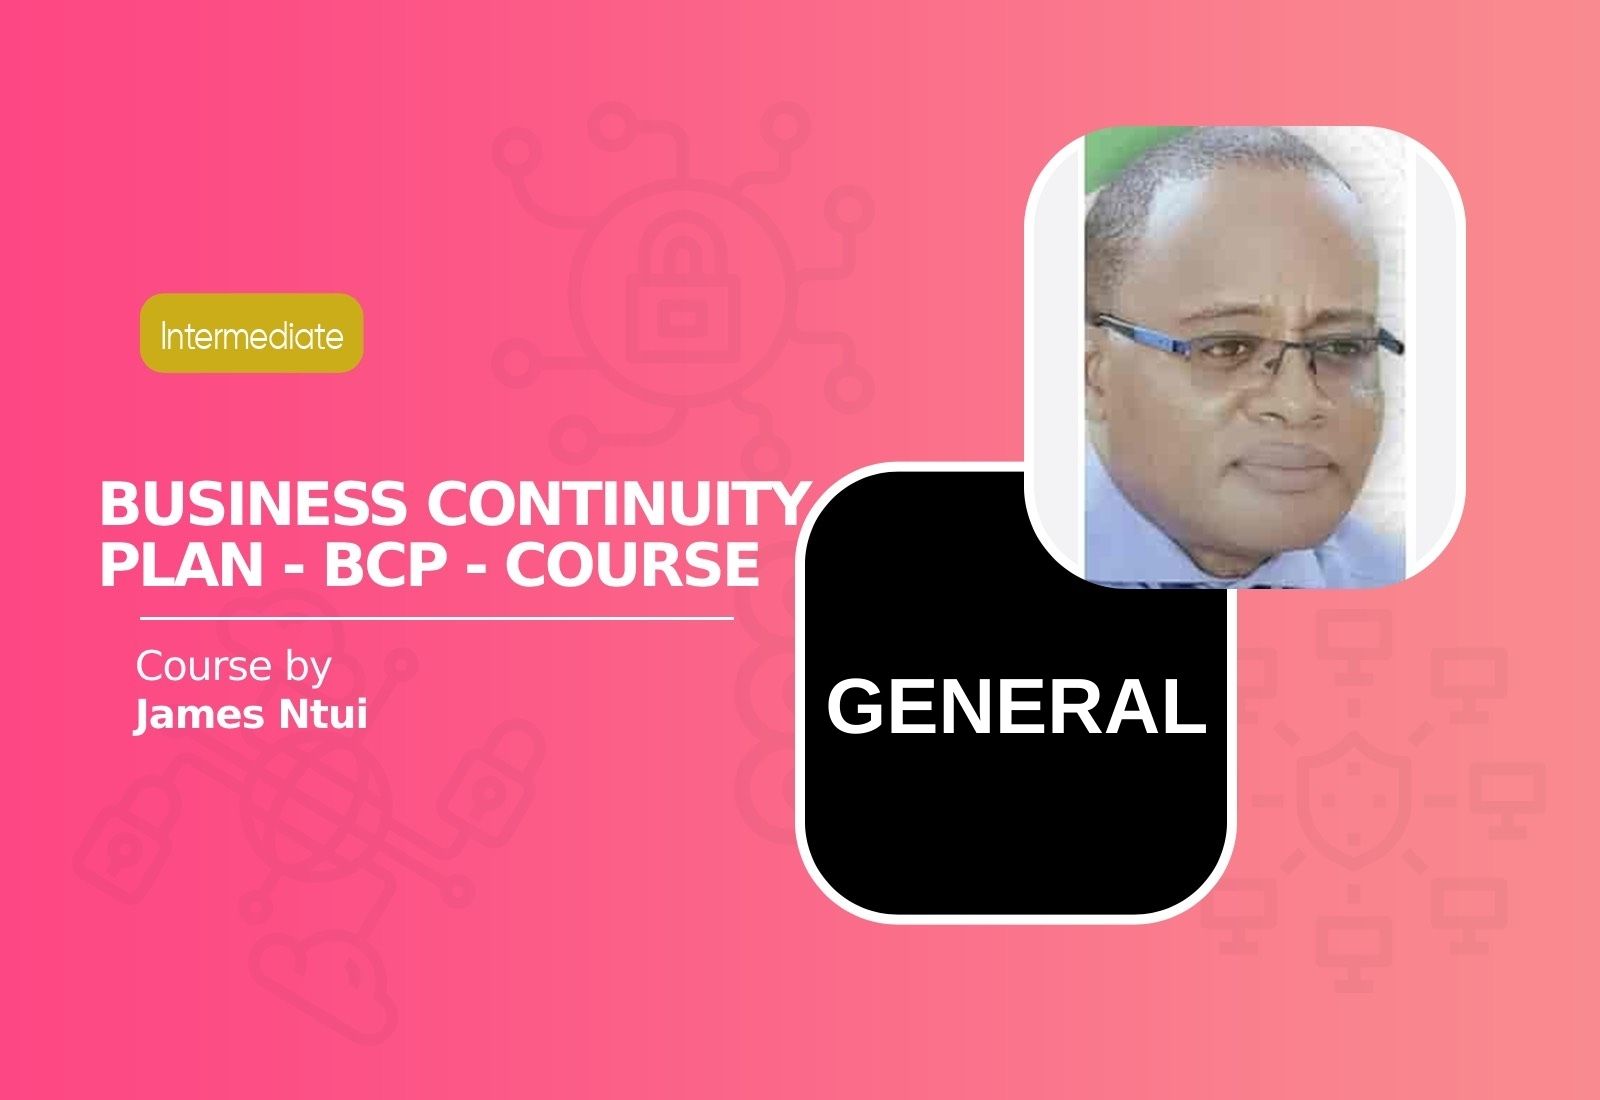 Business Continuity Plan - BCP - Course